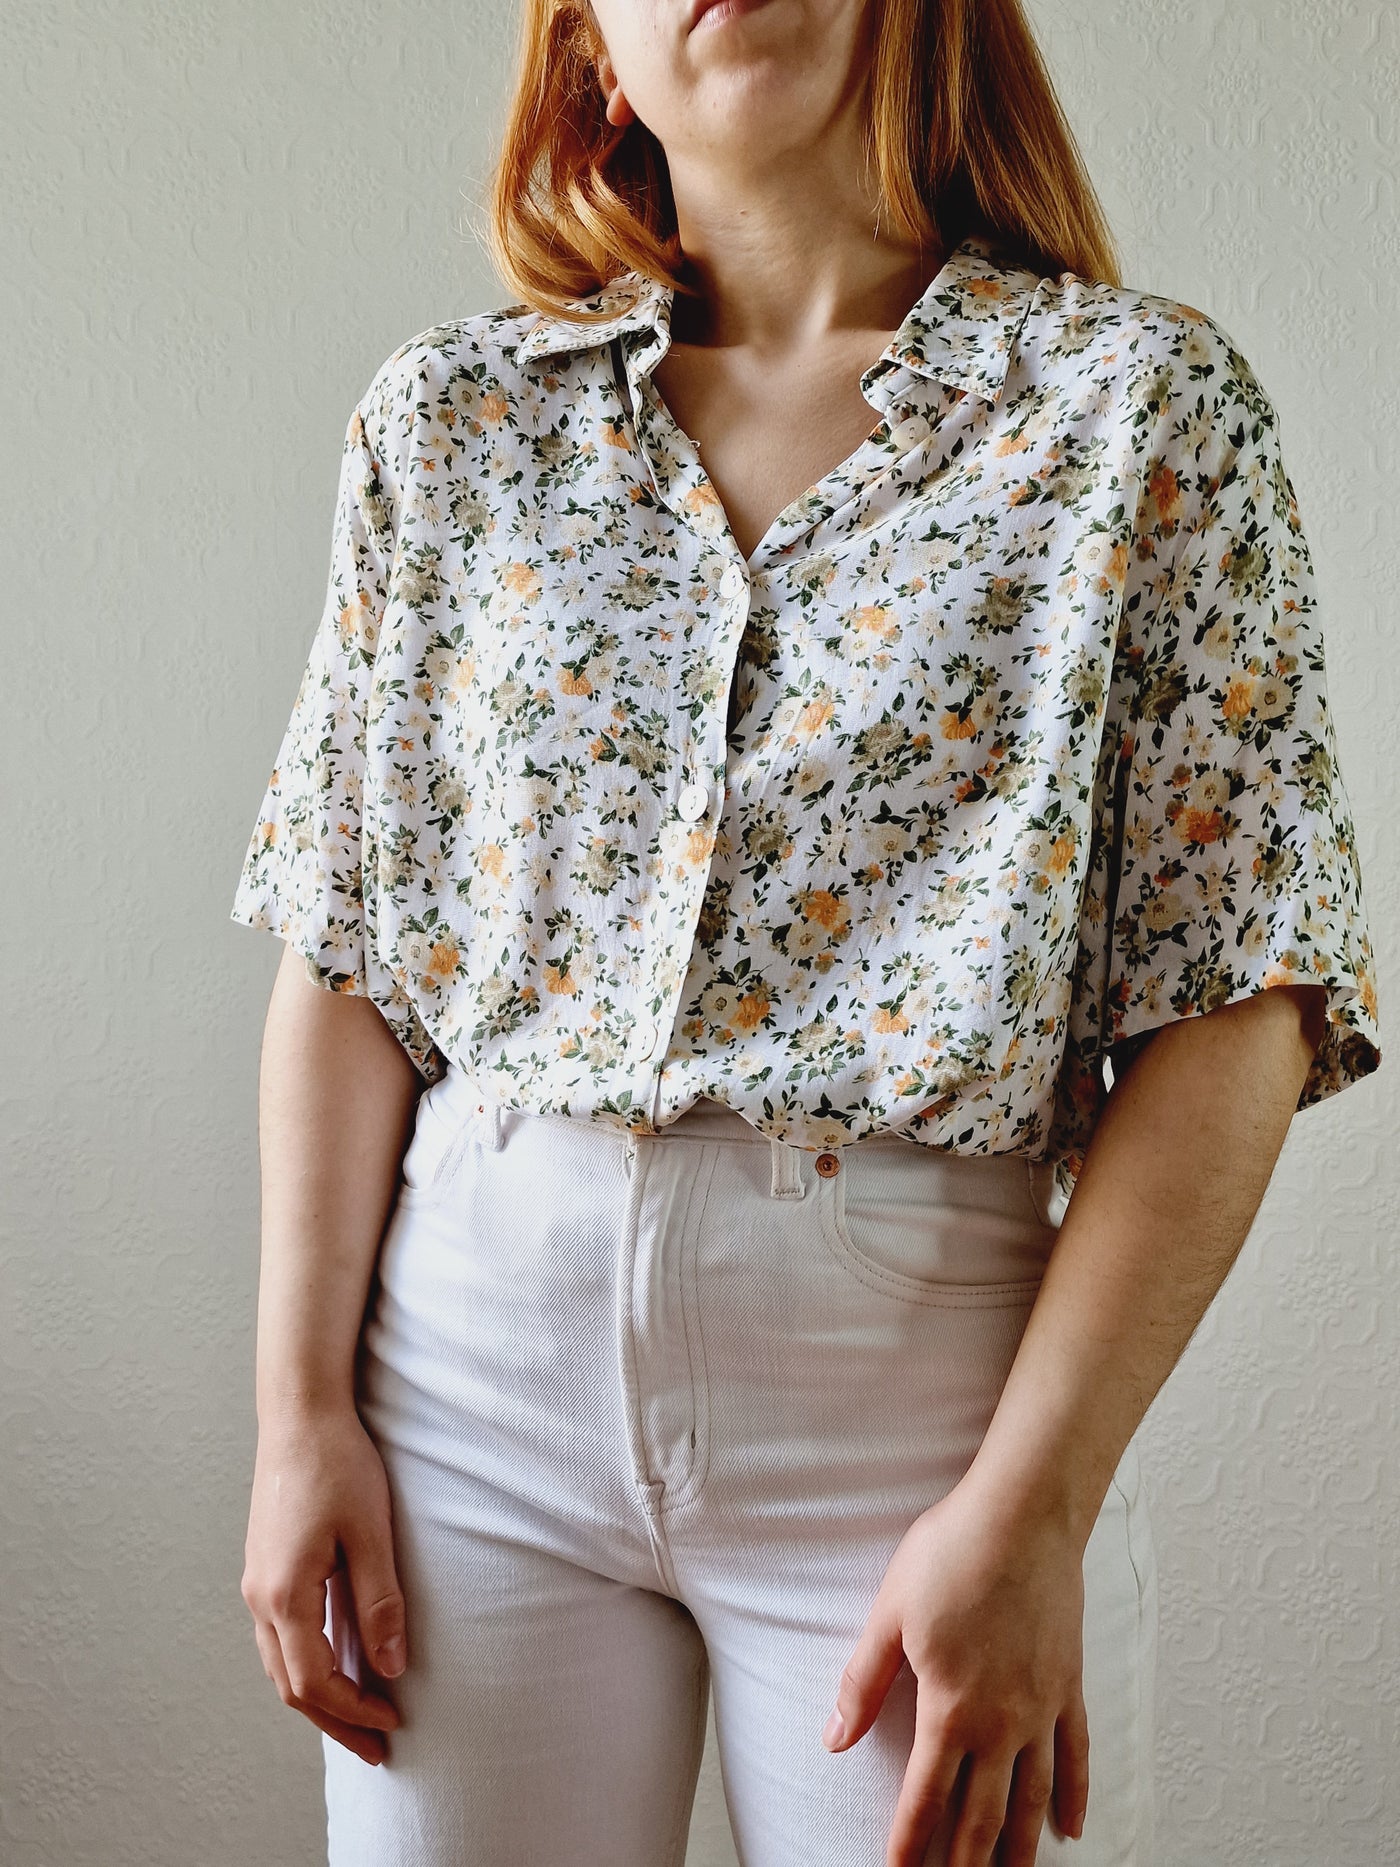 Vintage 80s White Short Sleeve Blouse with Green Floral Print - L